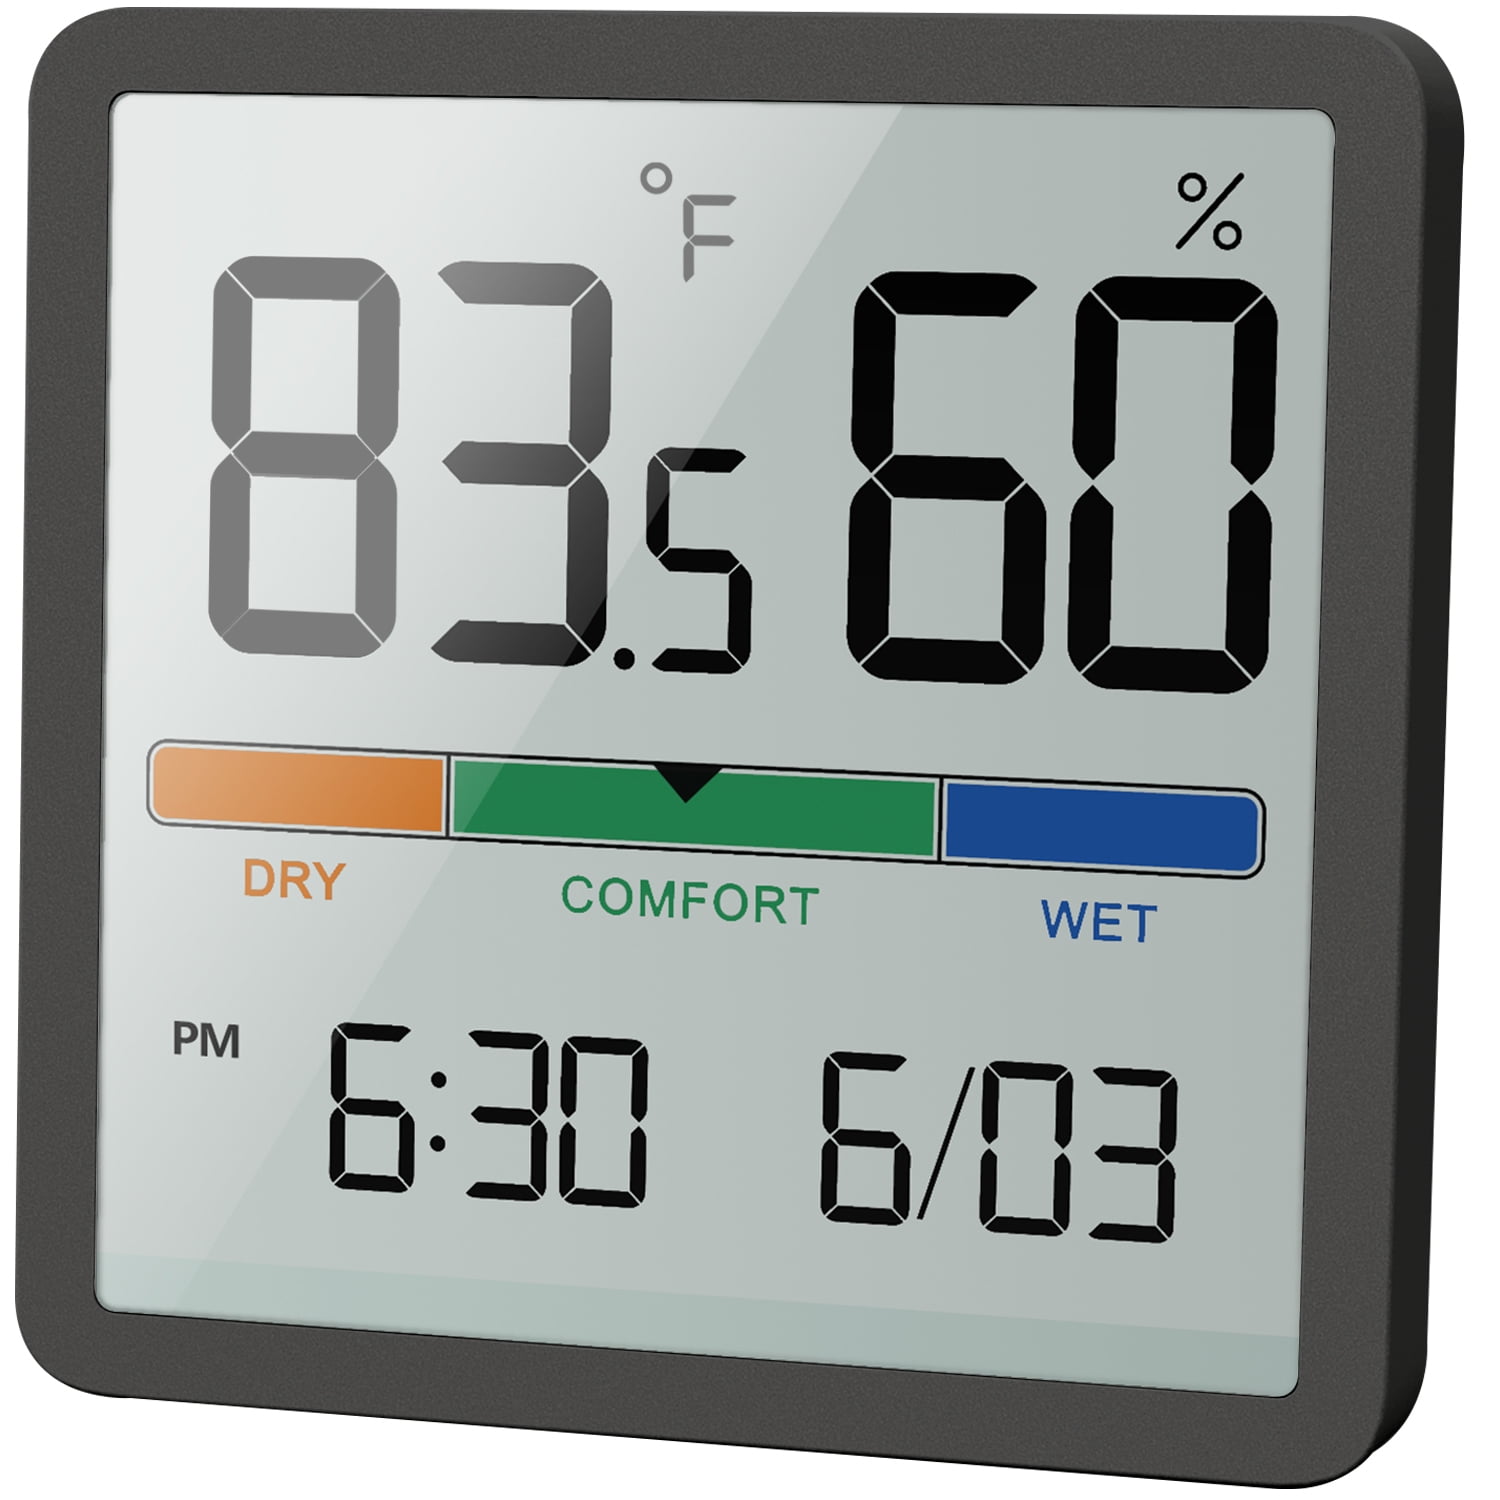 Mini LCD Digital Thermometer Hygrometer Indoor Room Electronic Temperature  Humidity Meter Sensor Gauge Weather Station For Home.Hygrometer  Thermometer, Smart Humidity Meter, Indoor Room Thermometer For Home  Greenhouse, Hight Accurate Temperature Sensor